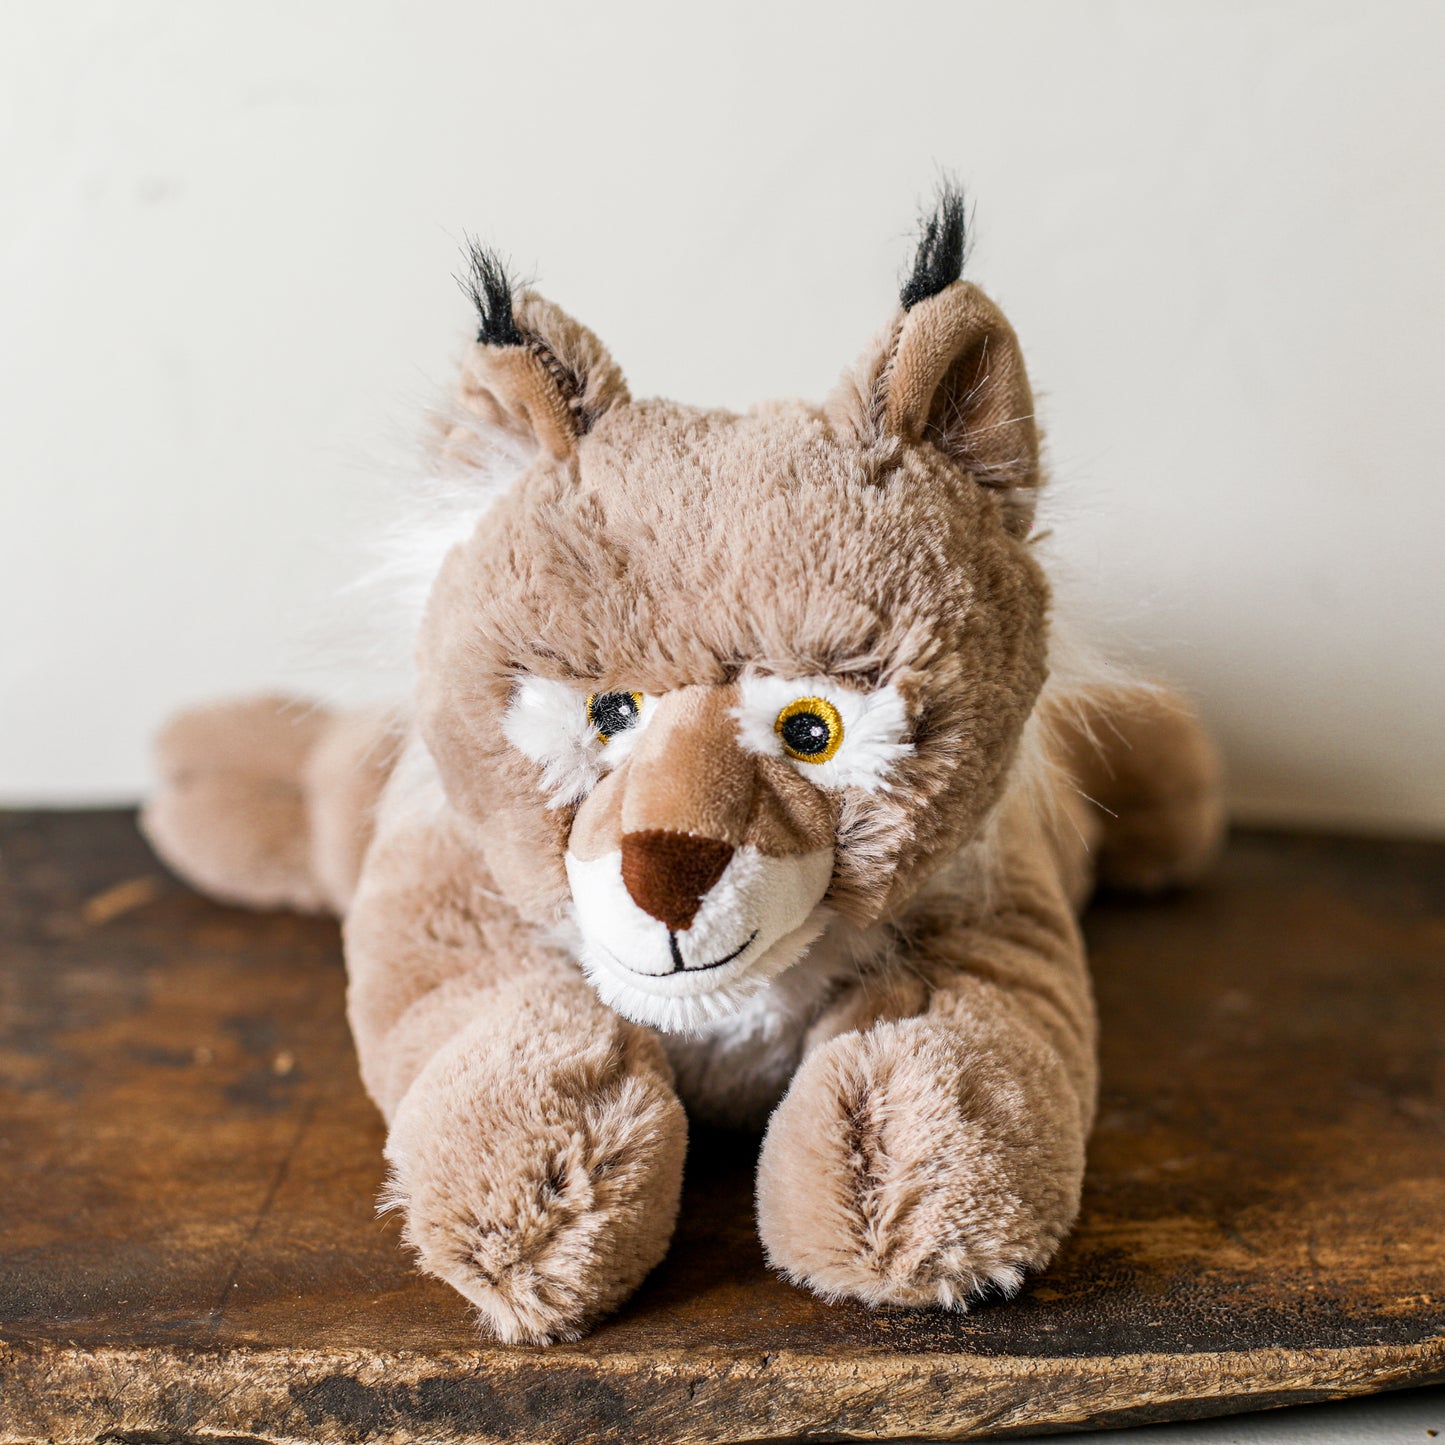 Buy WARMIES Warmth stuffed animal lynx with lavender filling